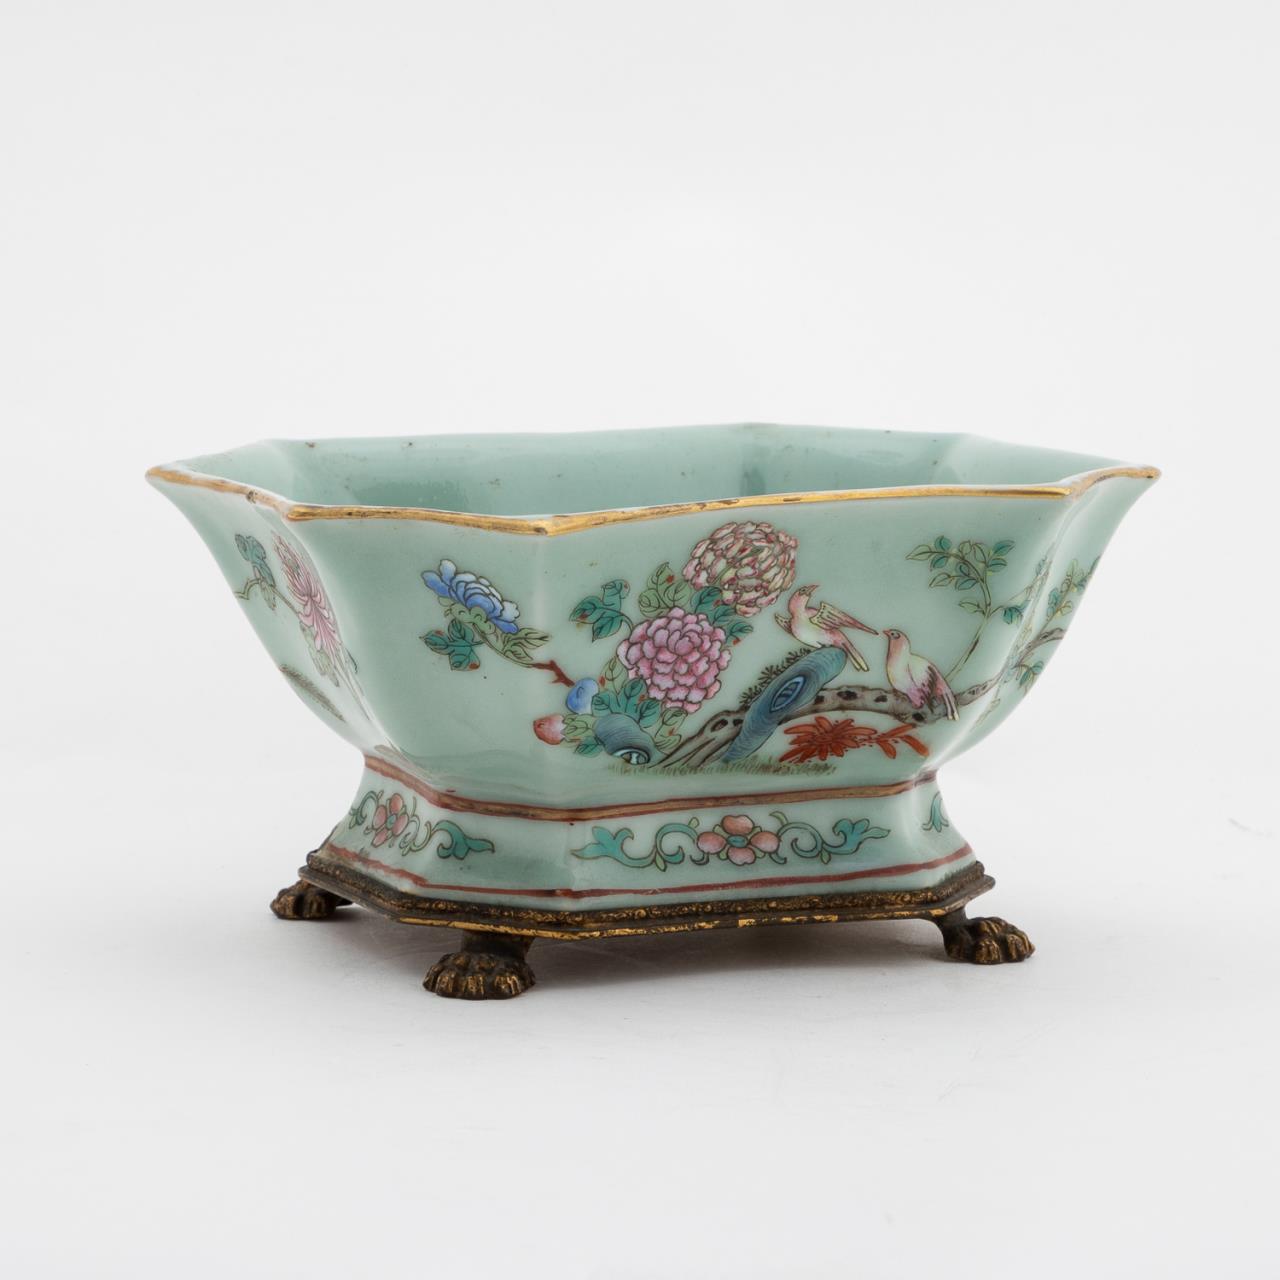 CHINESE EXPORT CELADON FLORAL 35c25b